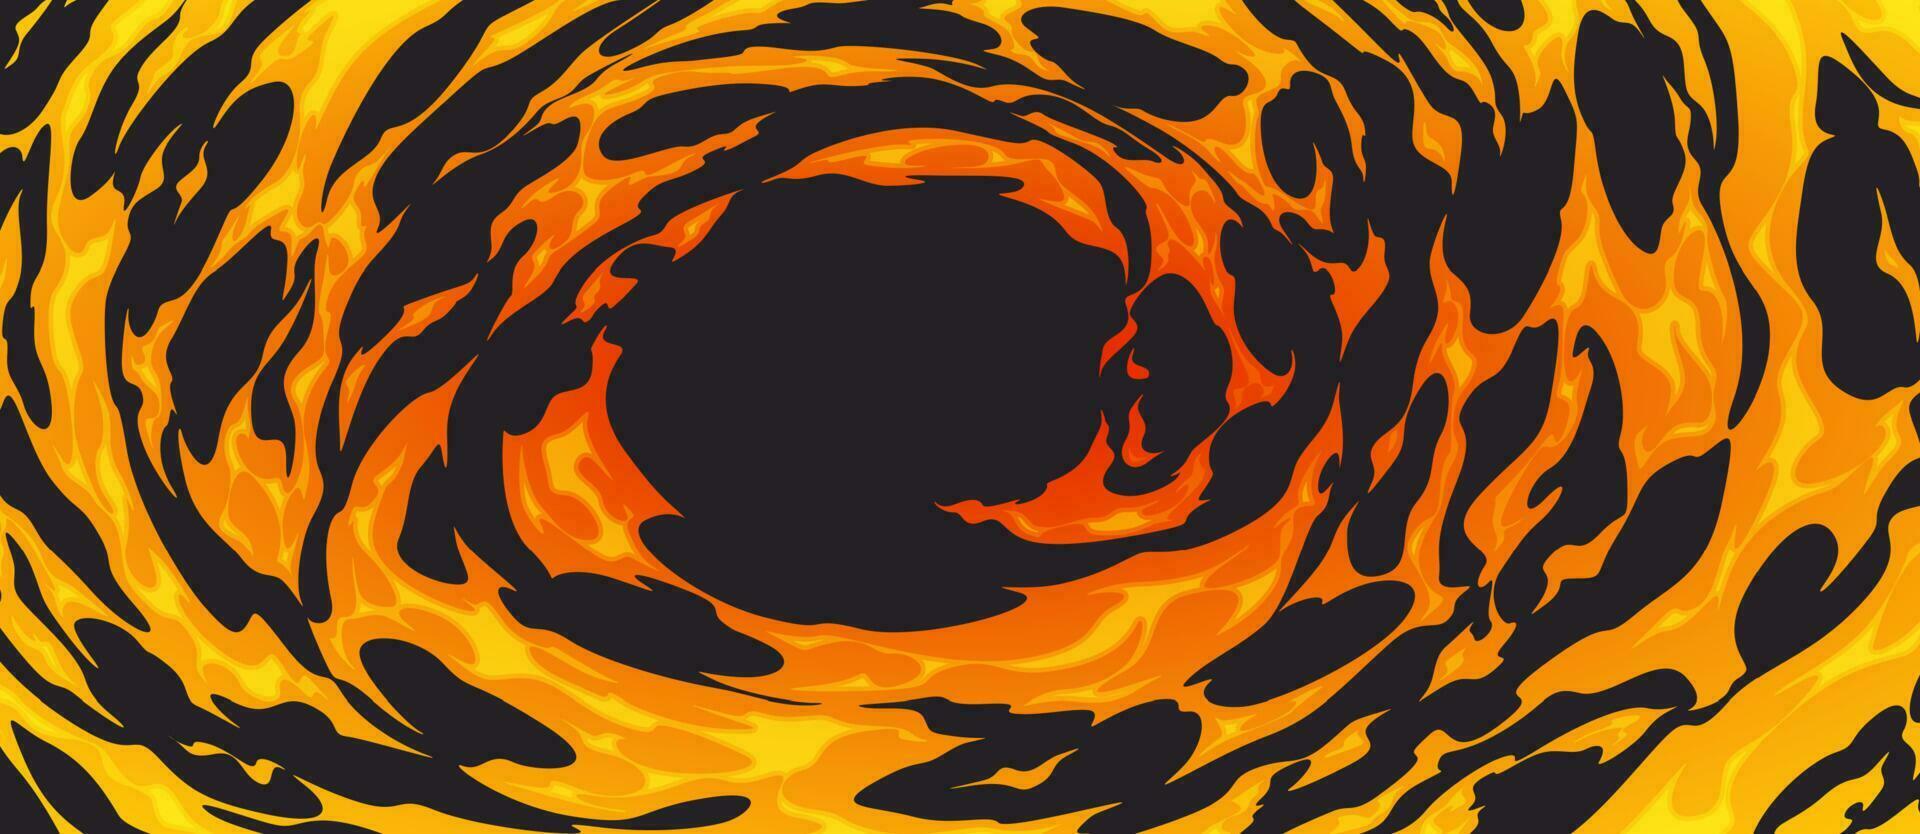 Abstract background with circle fire swirls vector